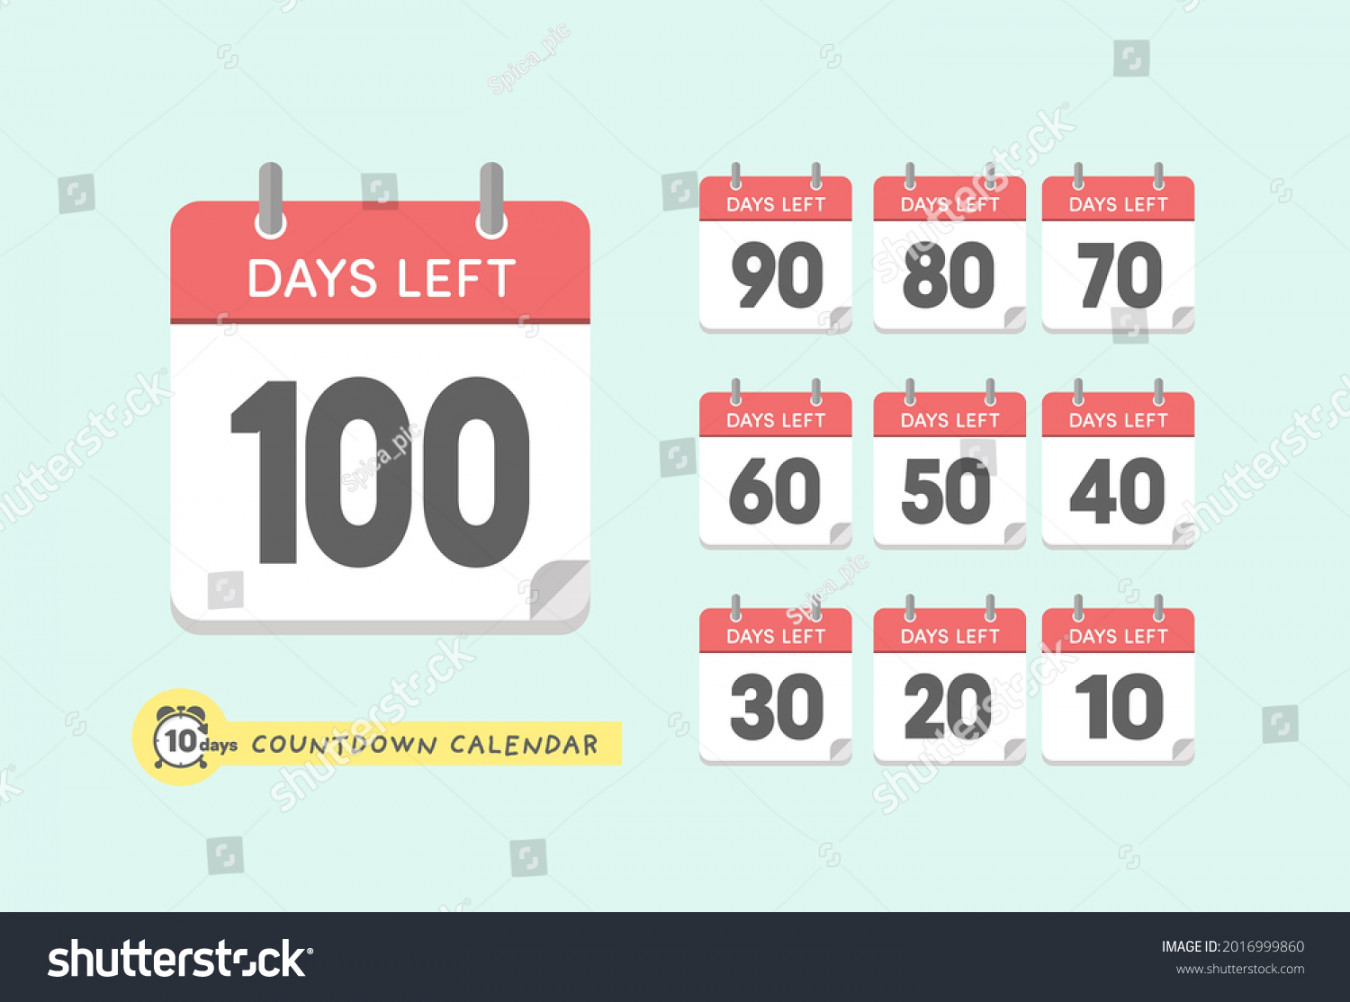 Days Countdown Images, Stock Photos, D objects, & Vectors